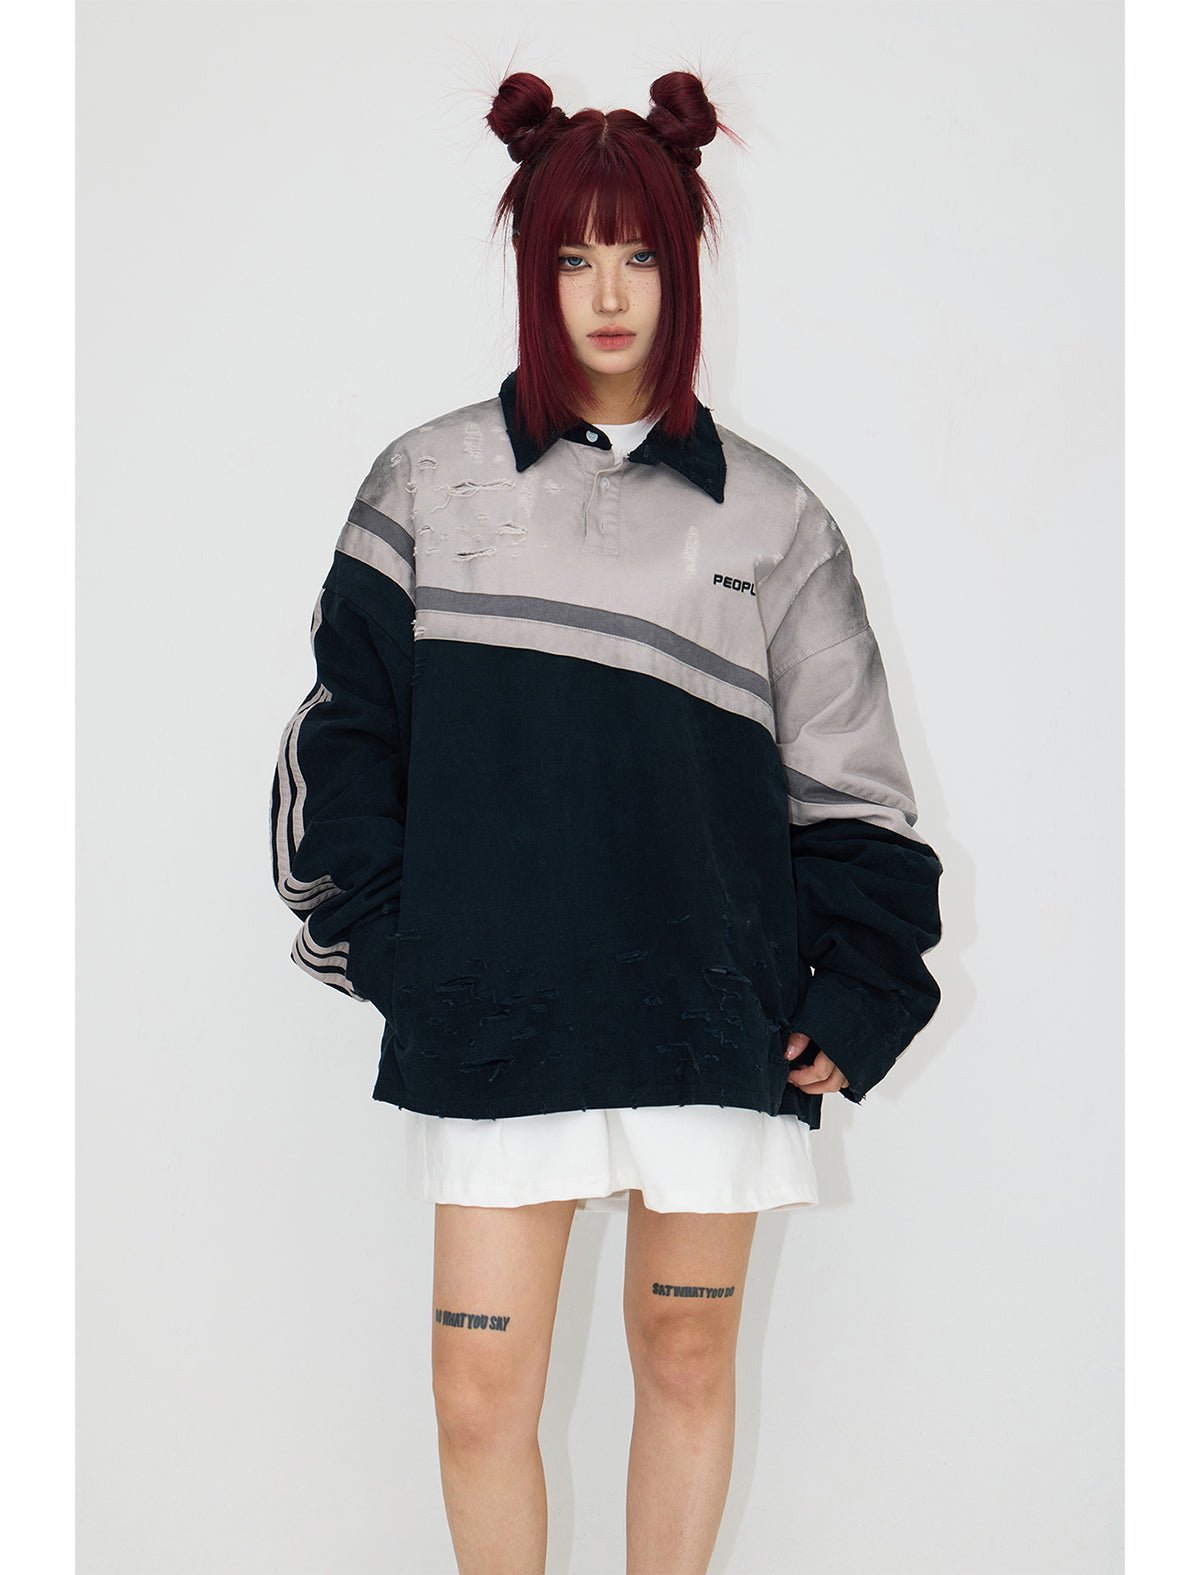 [PeopleStyle] Damaged Polo Lapel Pullover Jacket na793